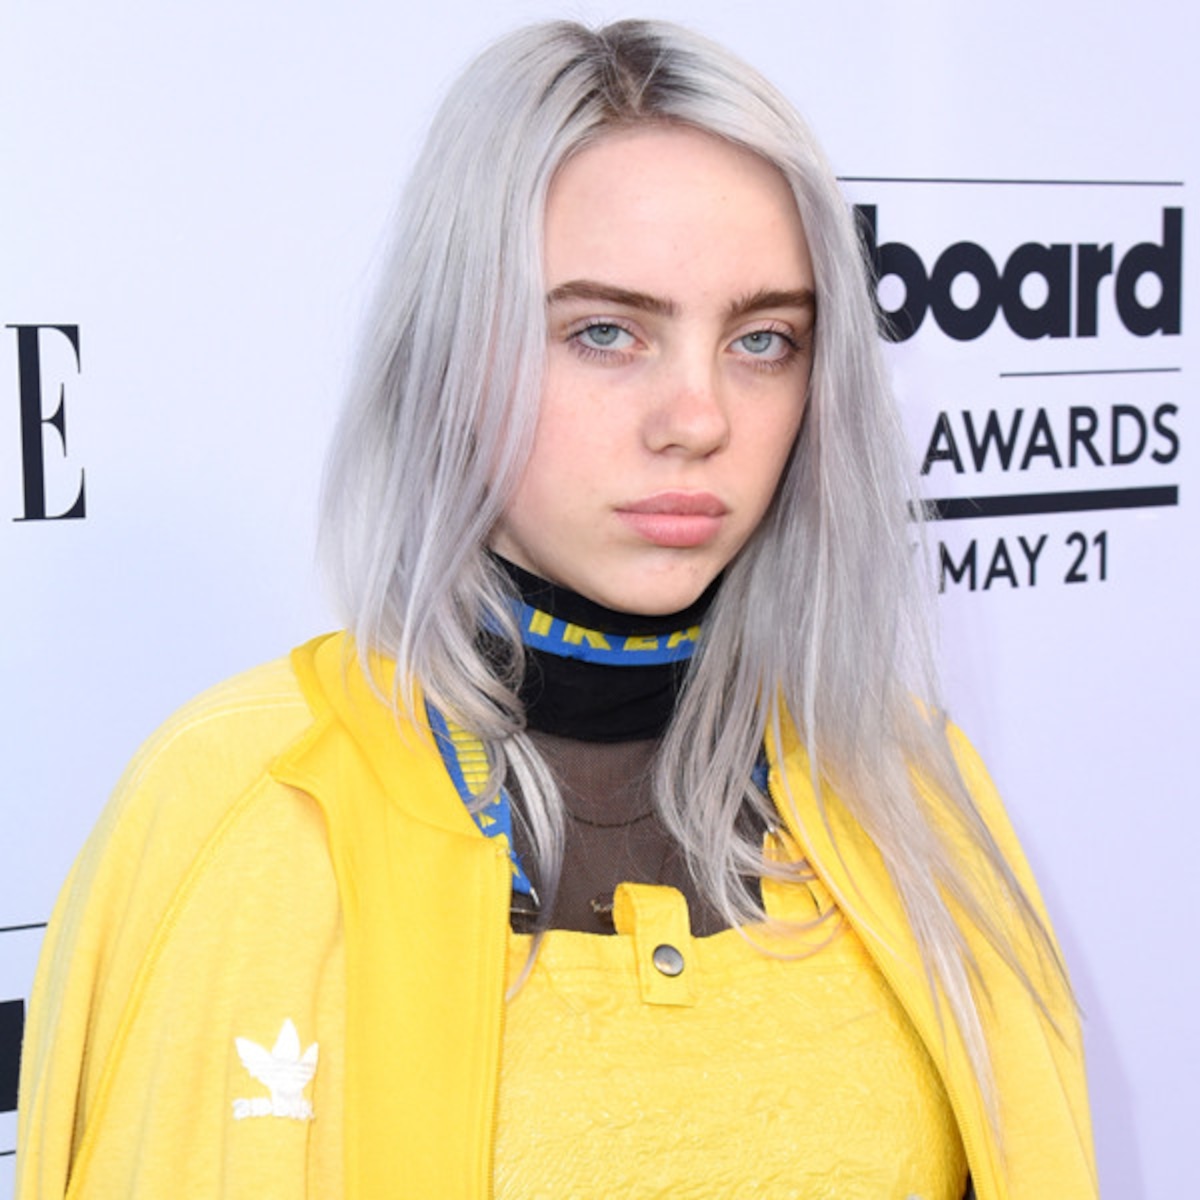 Billie Eilish Gets Candid About Anxiety, Depression and Fame | E! News